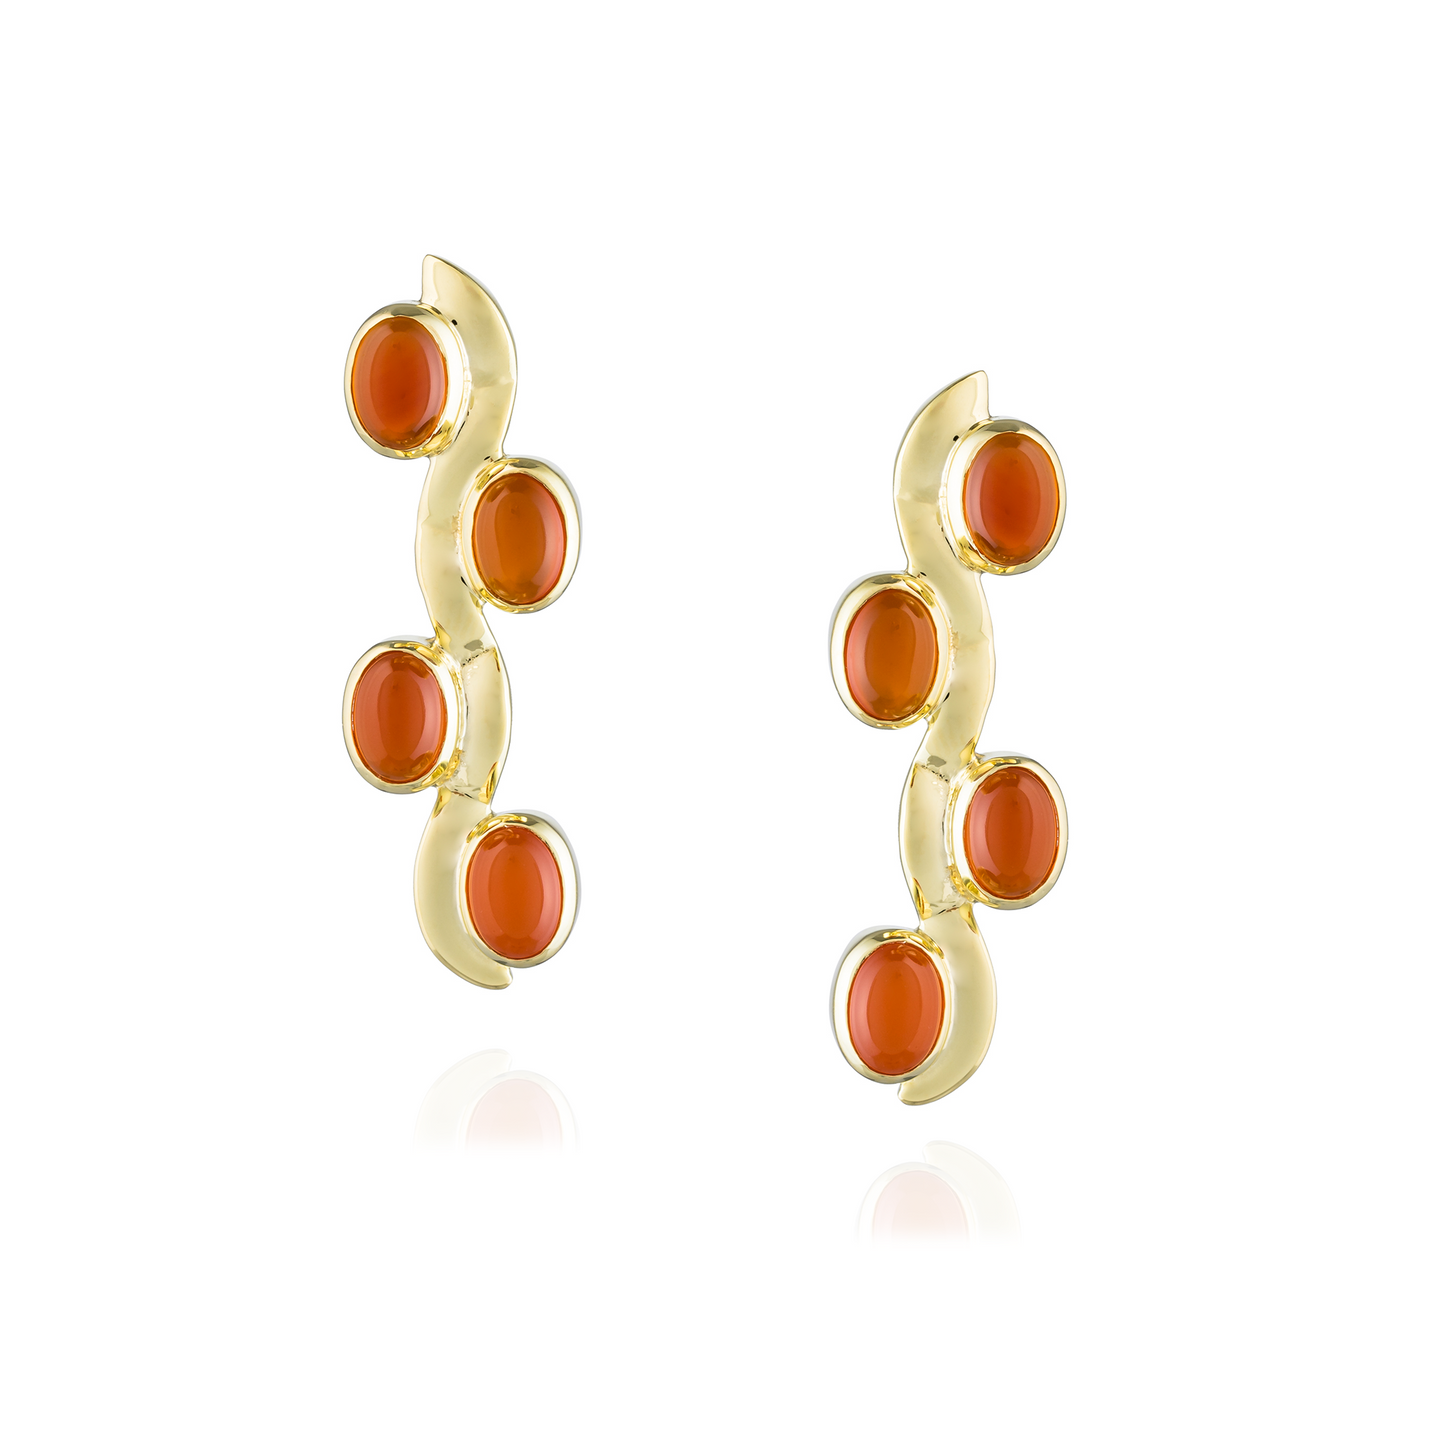 925 Silver Earrings plated in 18k Yellow Gold with Carnelian